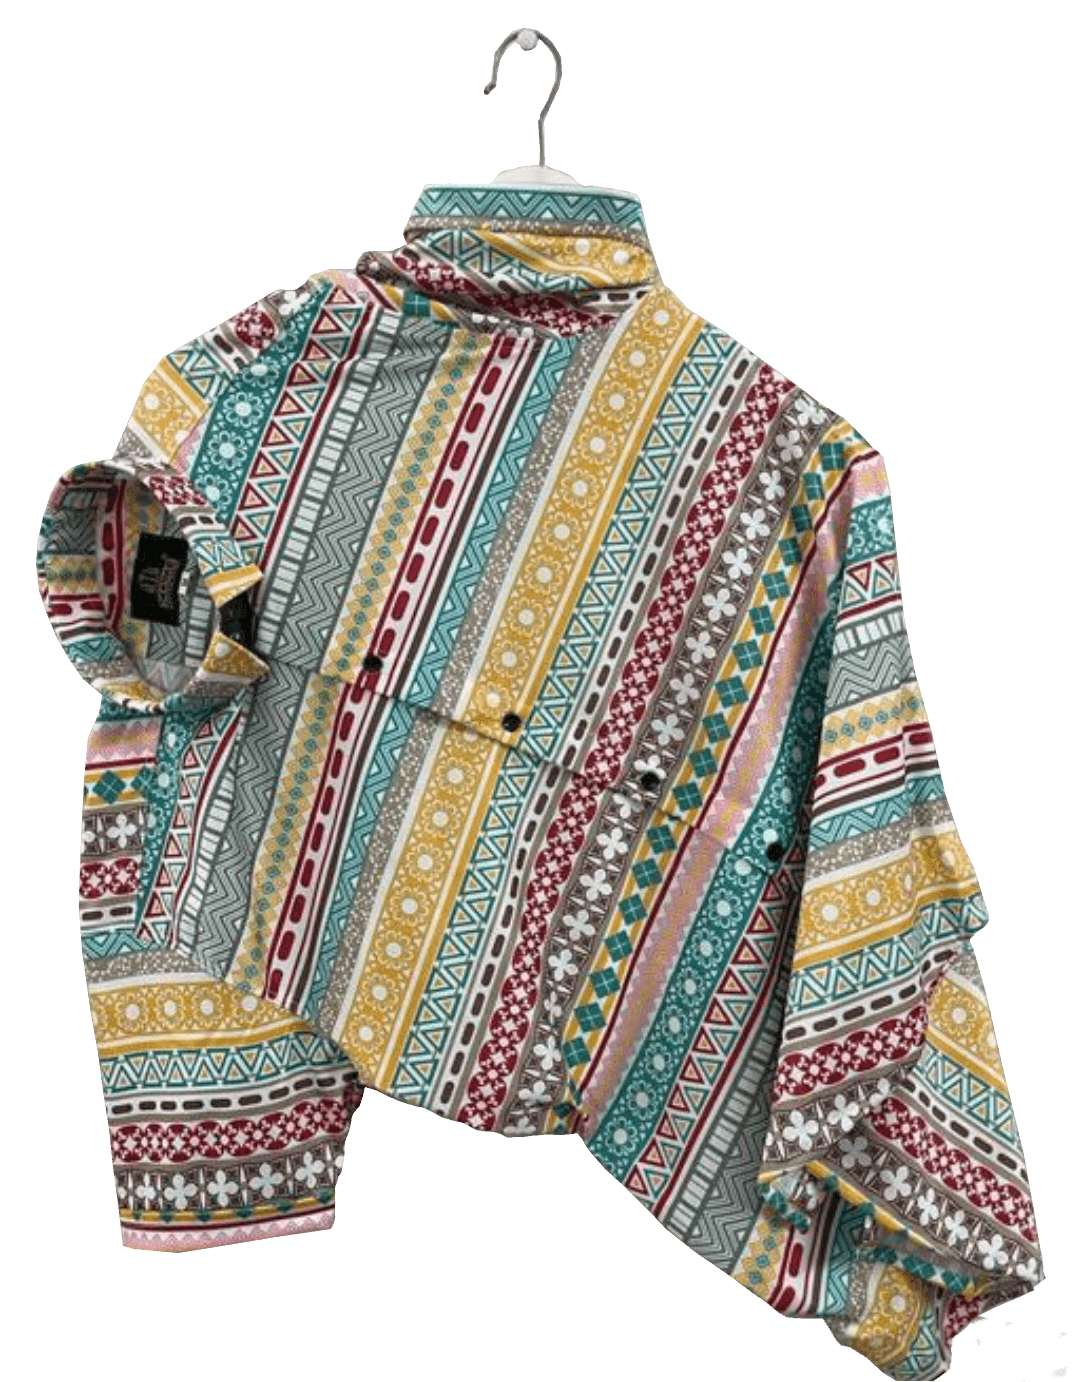 Hawaiian Shirts | Stretch Short Sleeve Printed Shirt for Men -Multicolor -1 - UD FABRIC - Your Style our Design